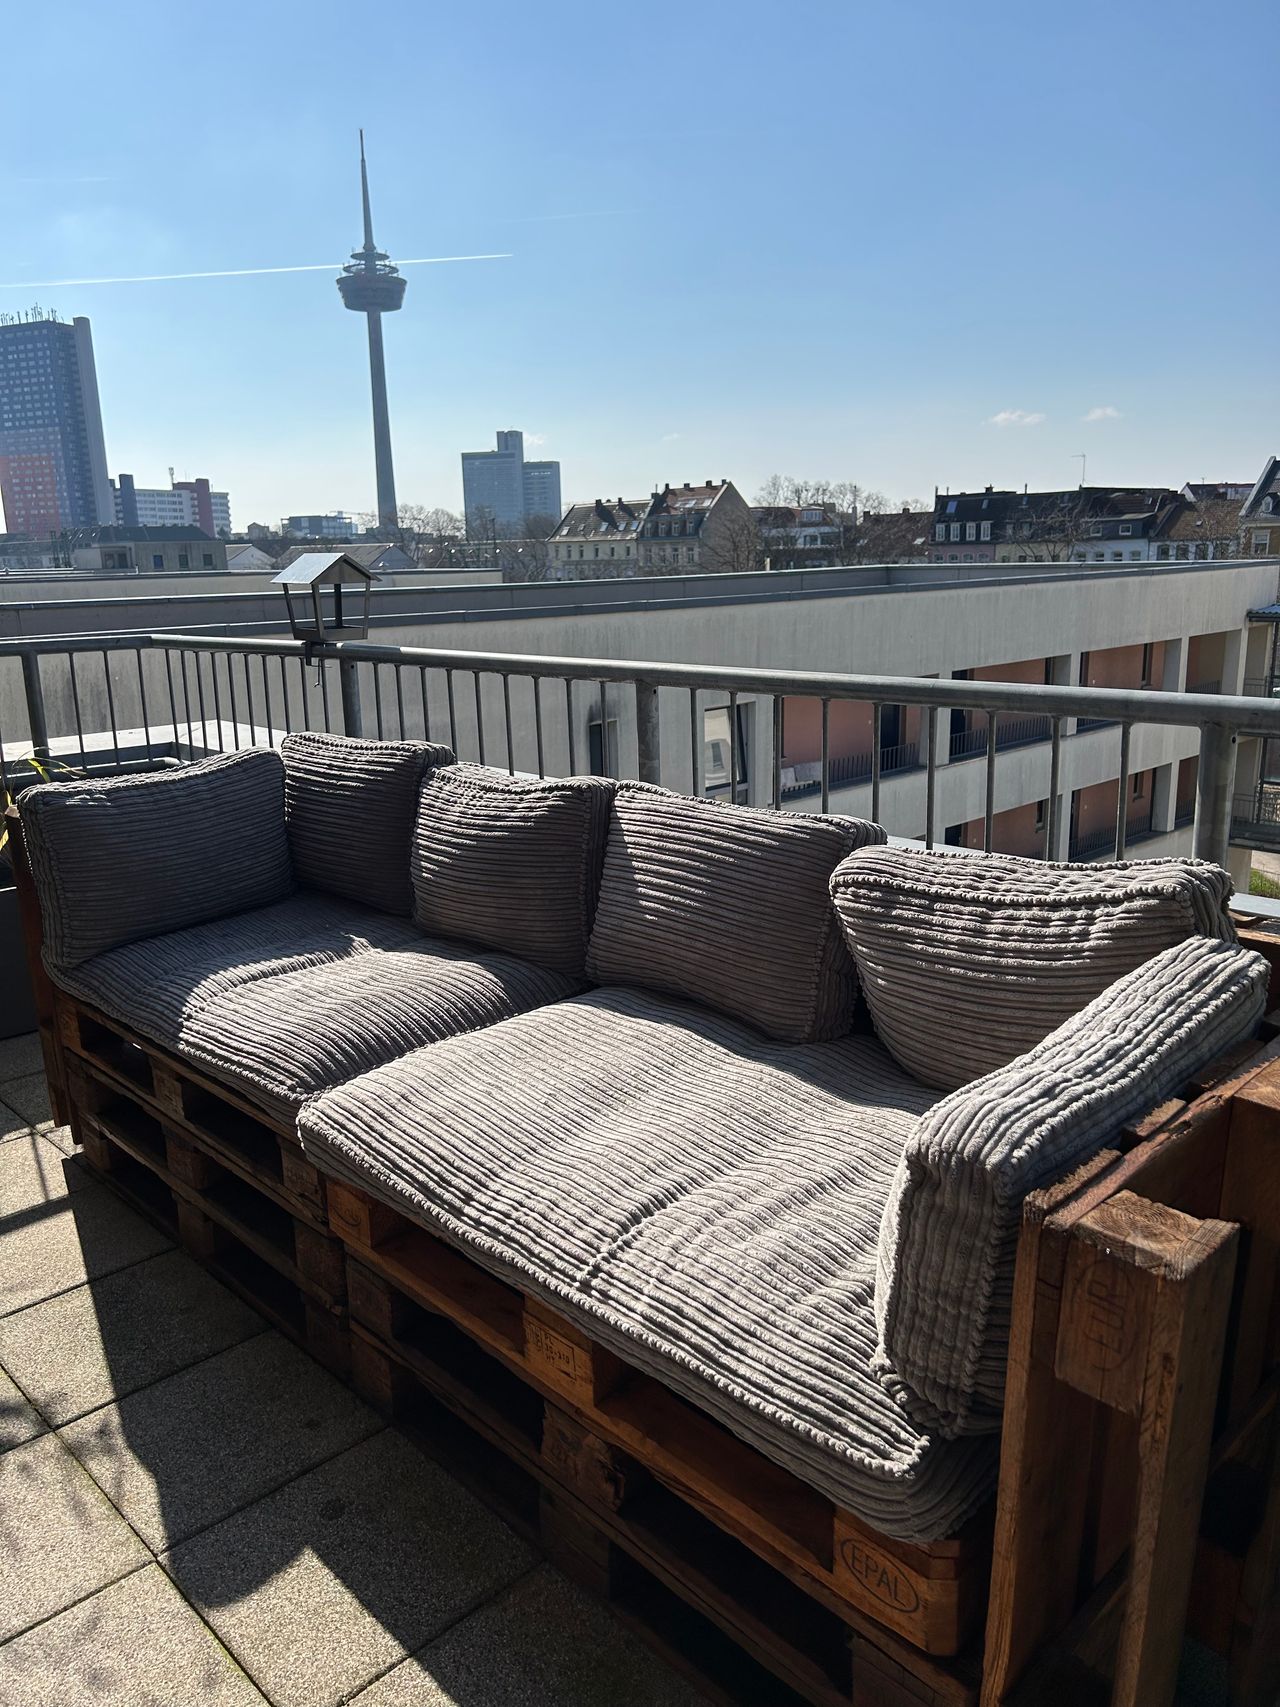 Sunny living on top of the roofs in Cologne Neuehrenfeld